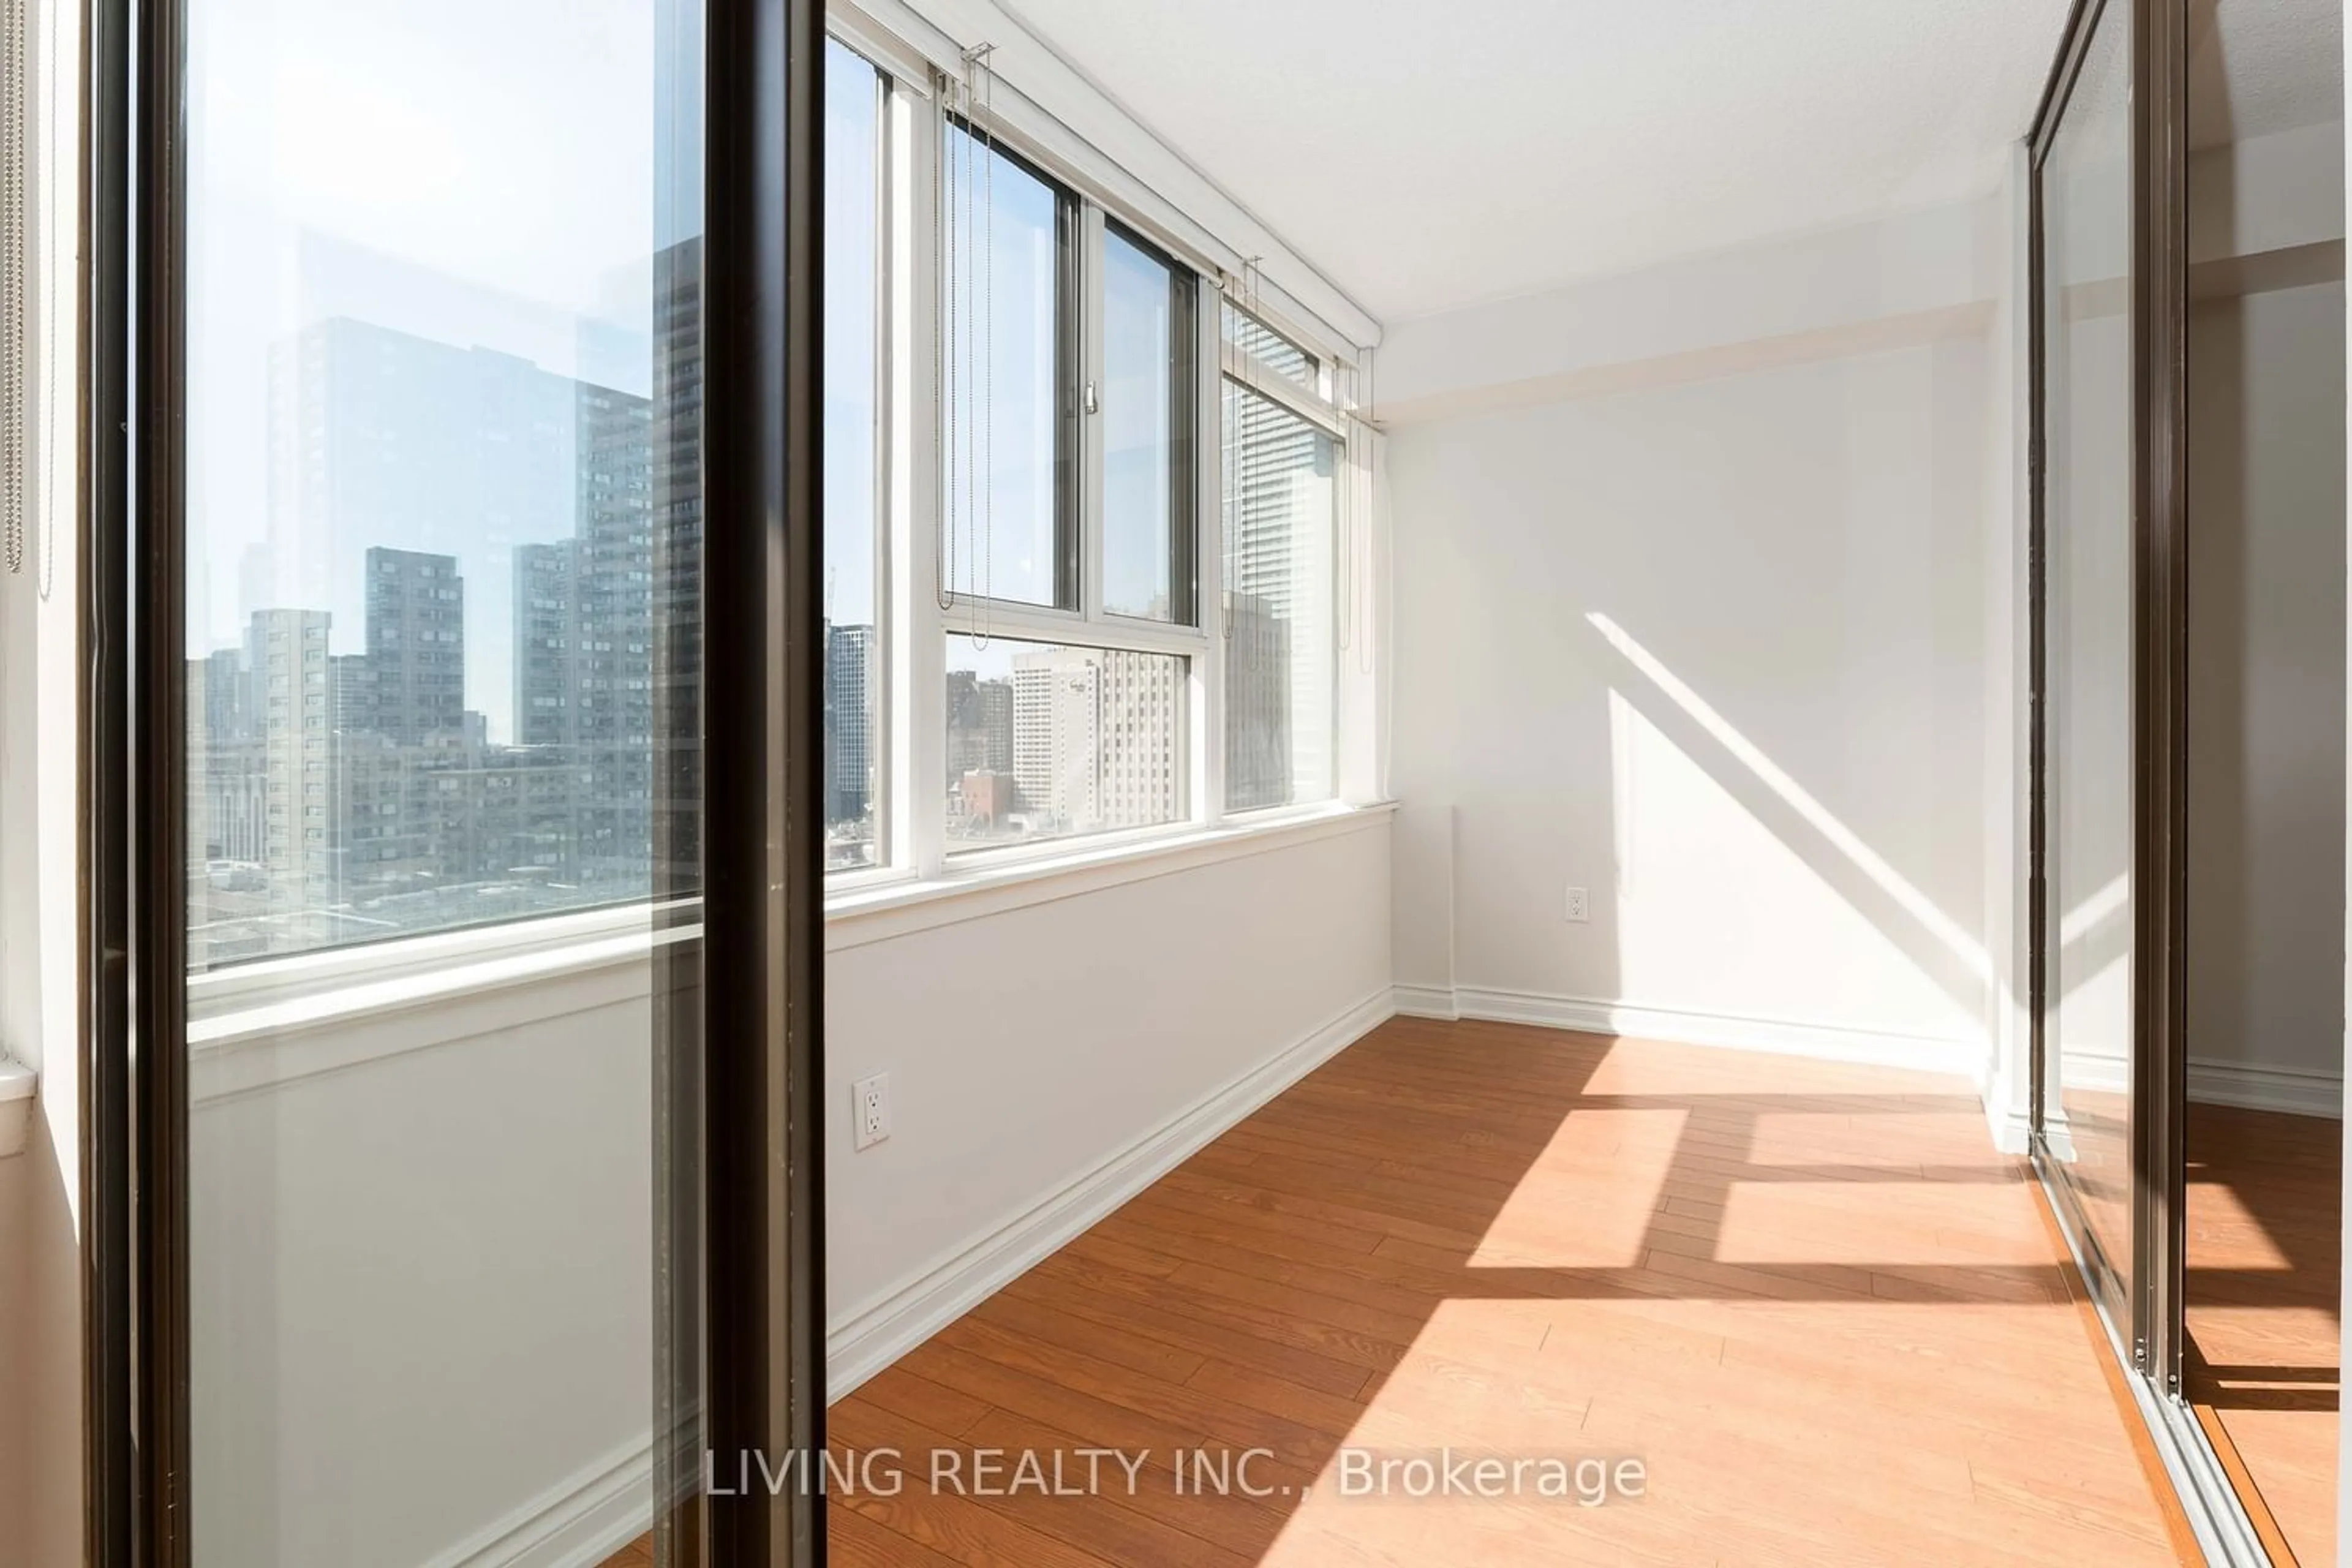 A pic of a room for 45 Carlton St #1515, Toronto Ontario M5B 2H9